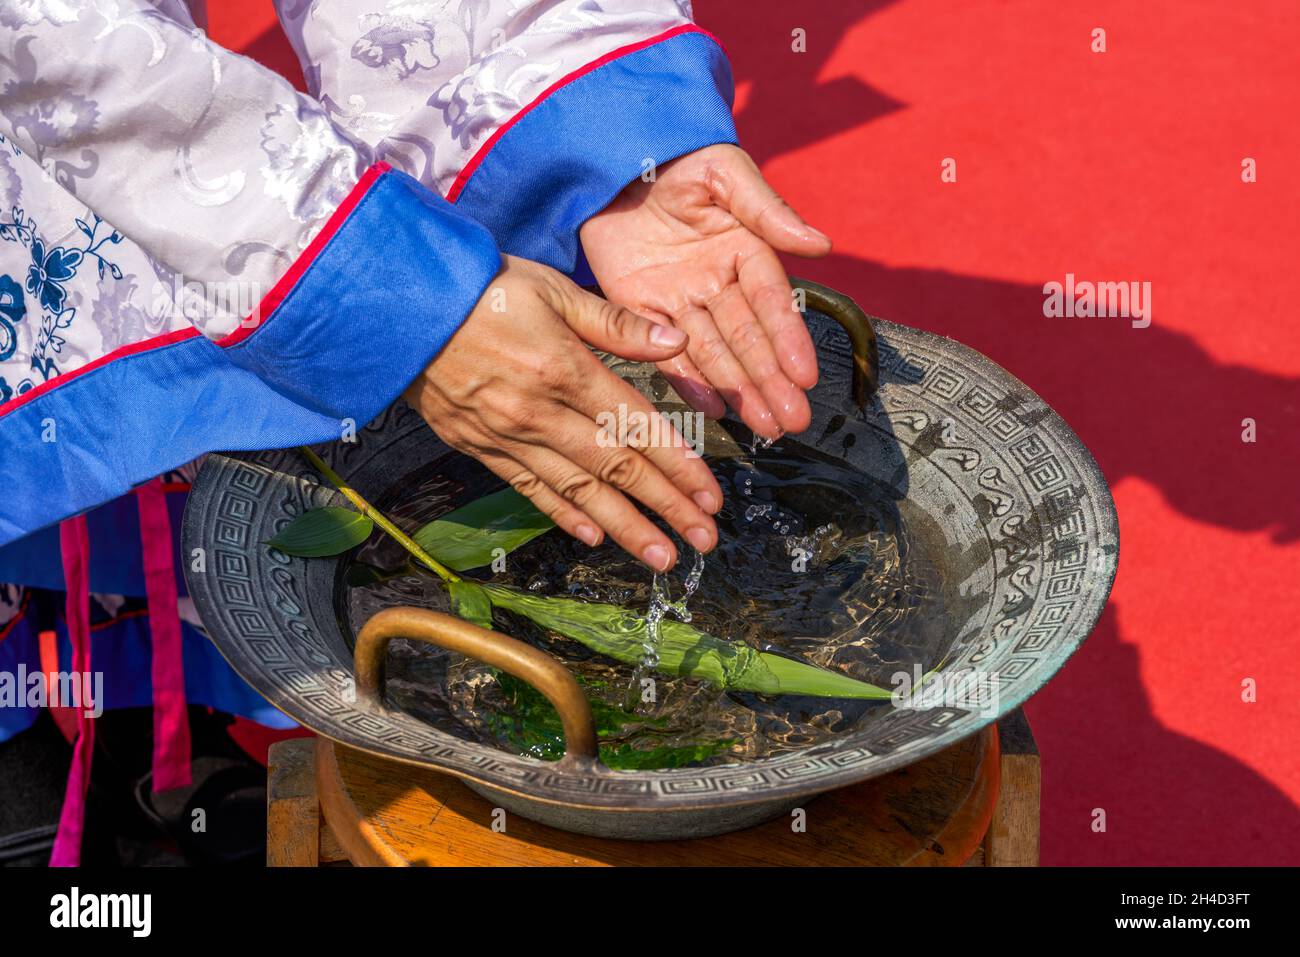 People wash their hands in the bronze basin at the ceremony to worship Confucius Stock Photo